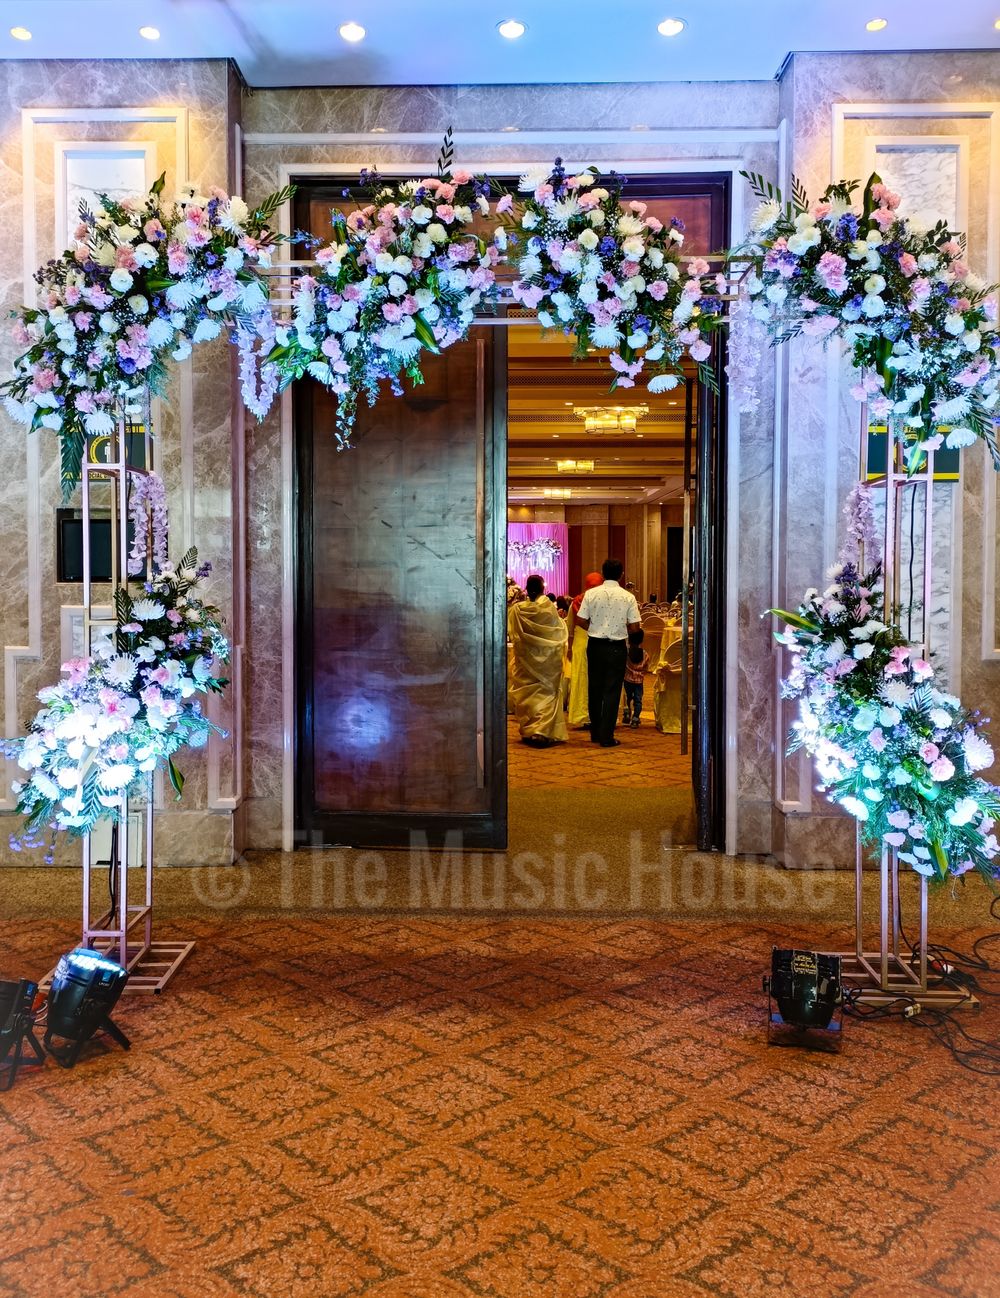 Photo From Decoration  - By The Music House